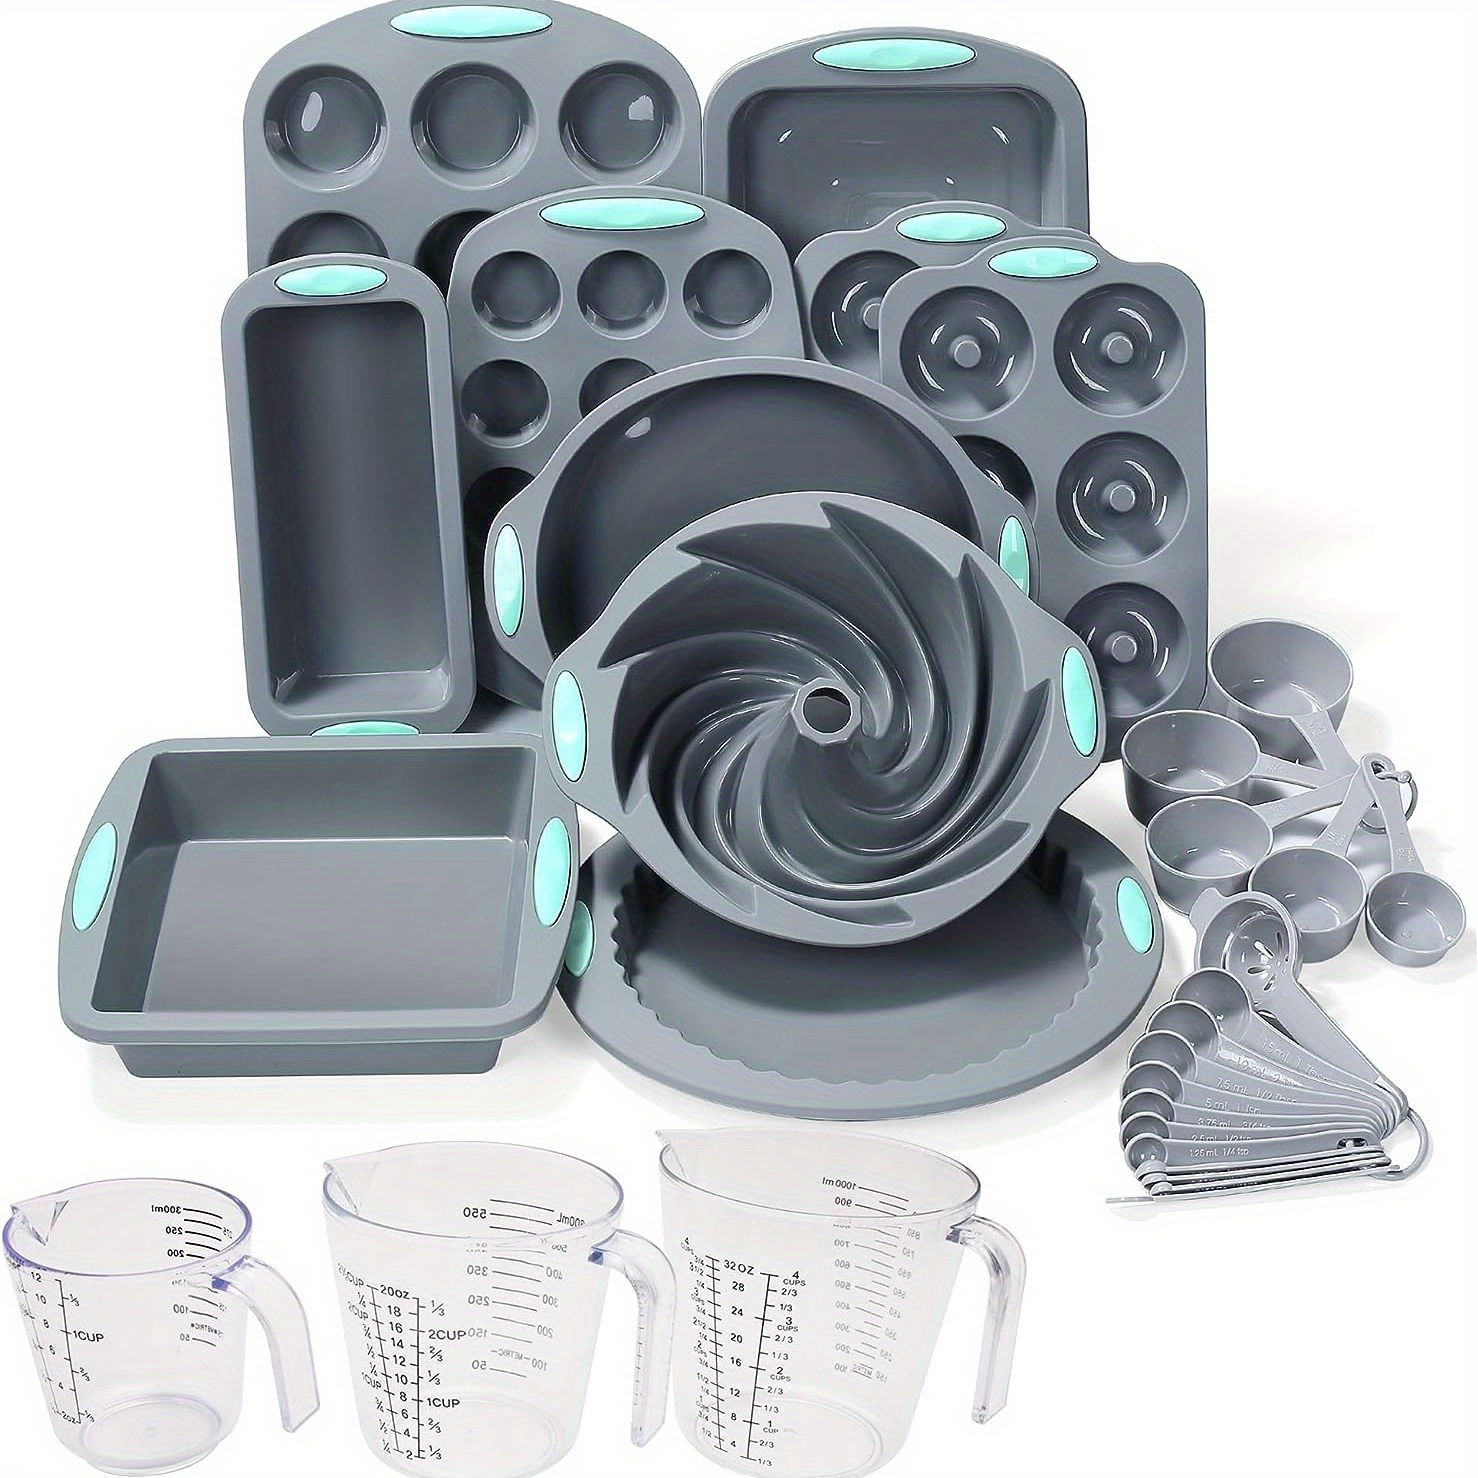 Measuring Cups and Spoons Of 12 Pcs, Kitchen Accessories Tools Set (Sky  Blue)